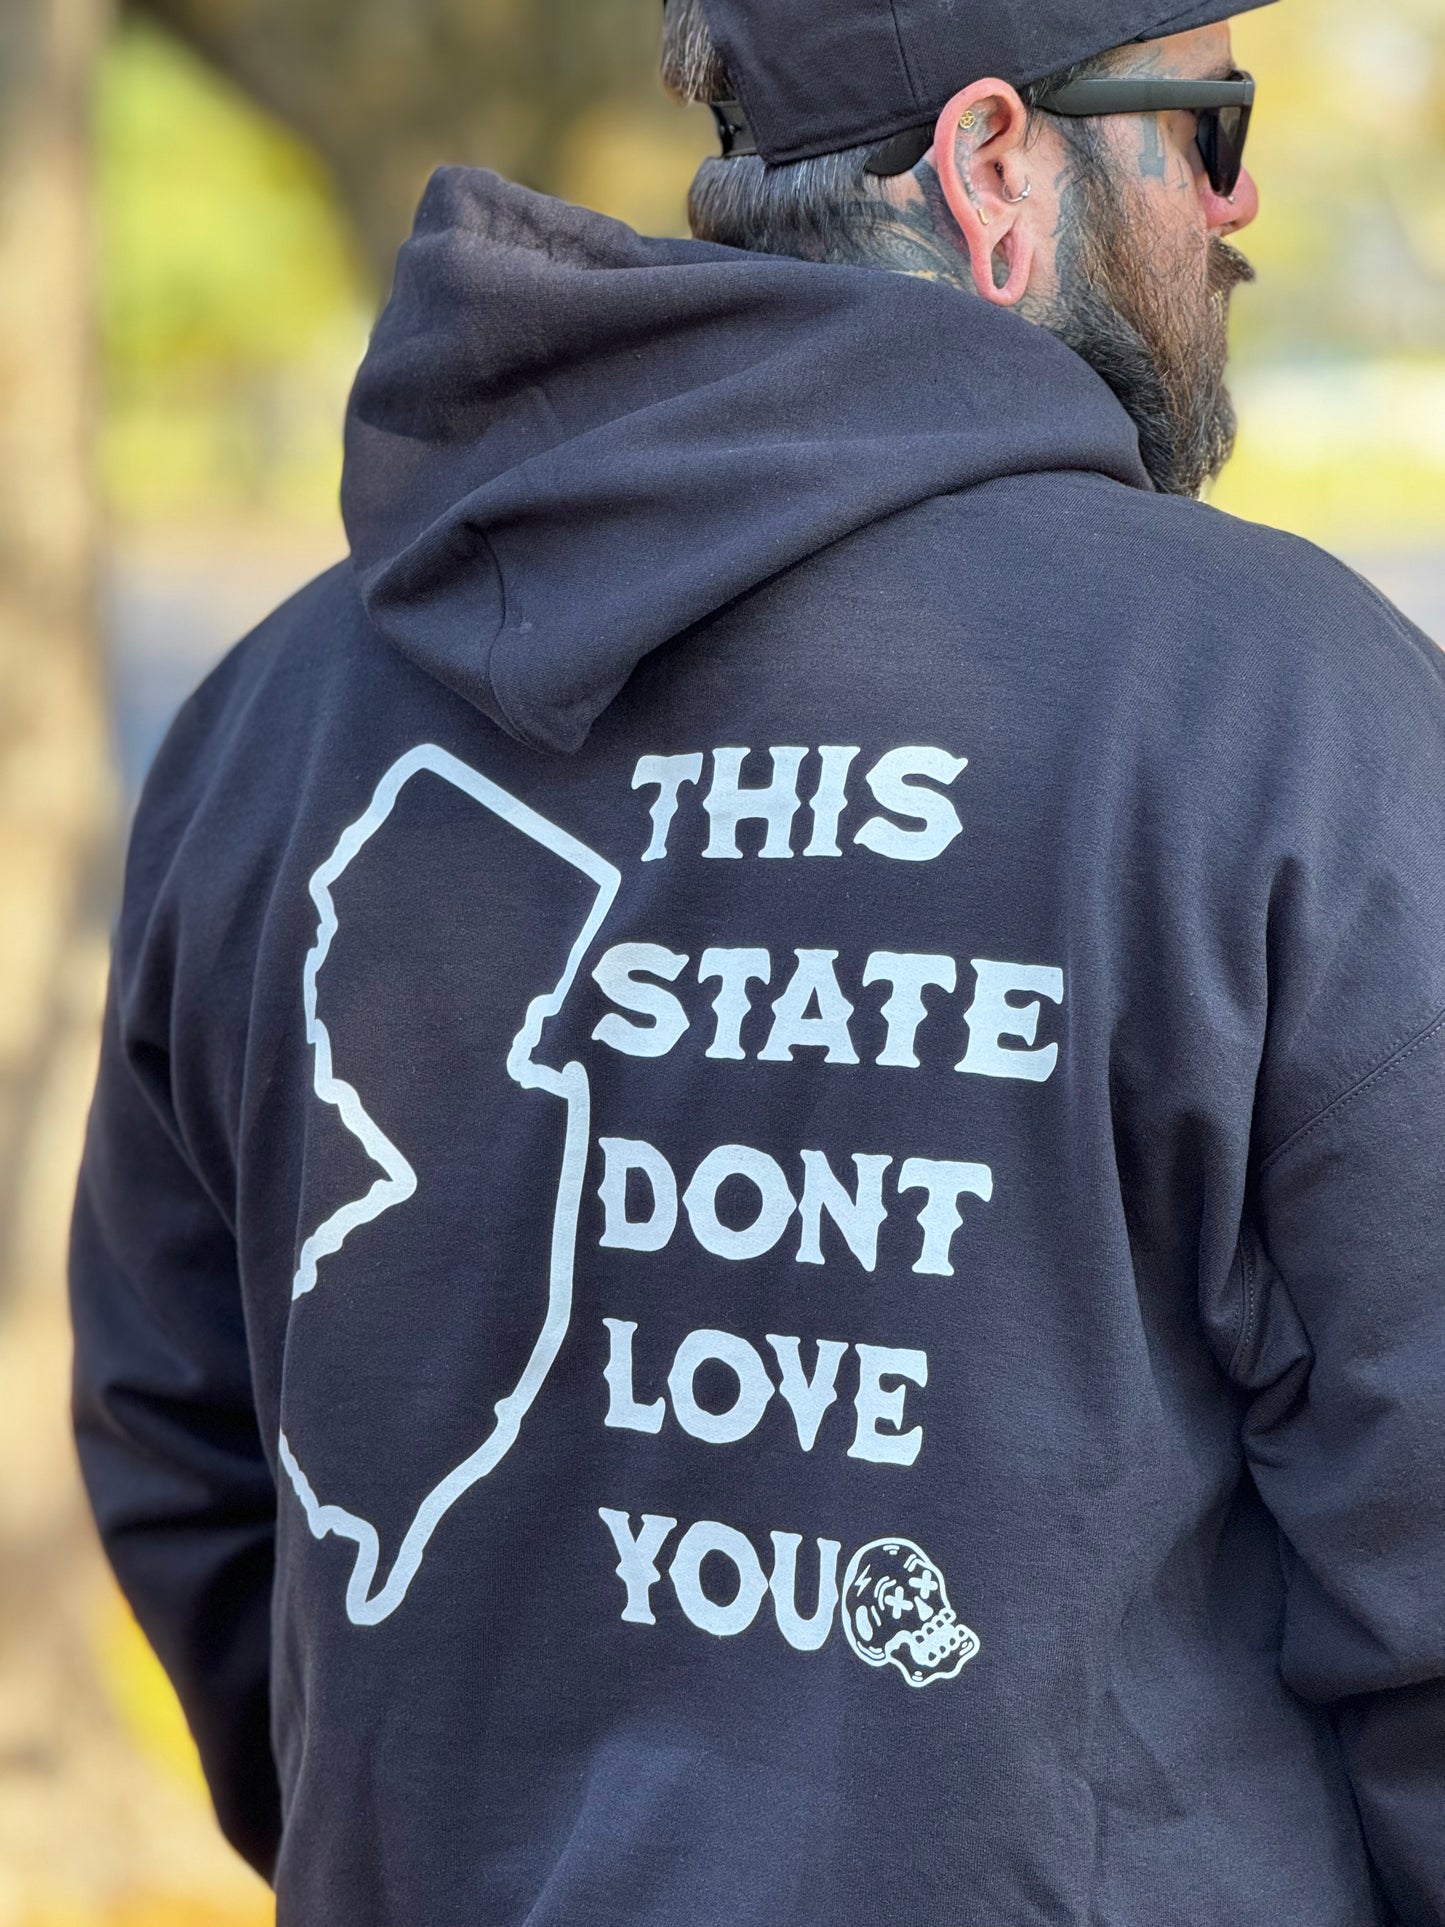 "This State Don't Love You" Shirt or Hoodie